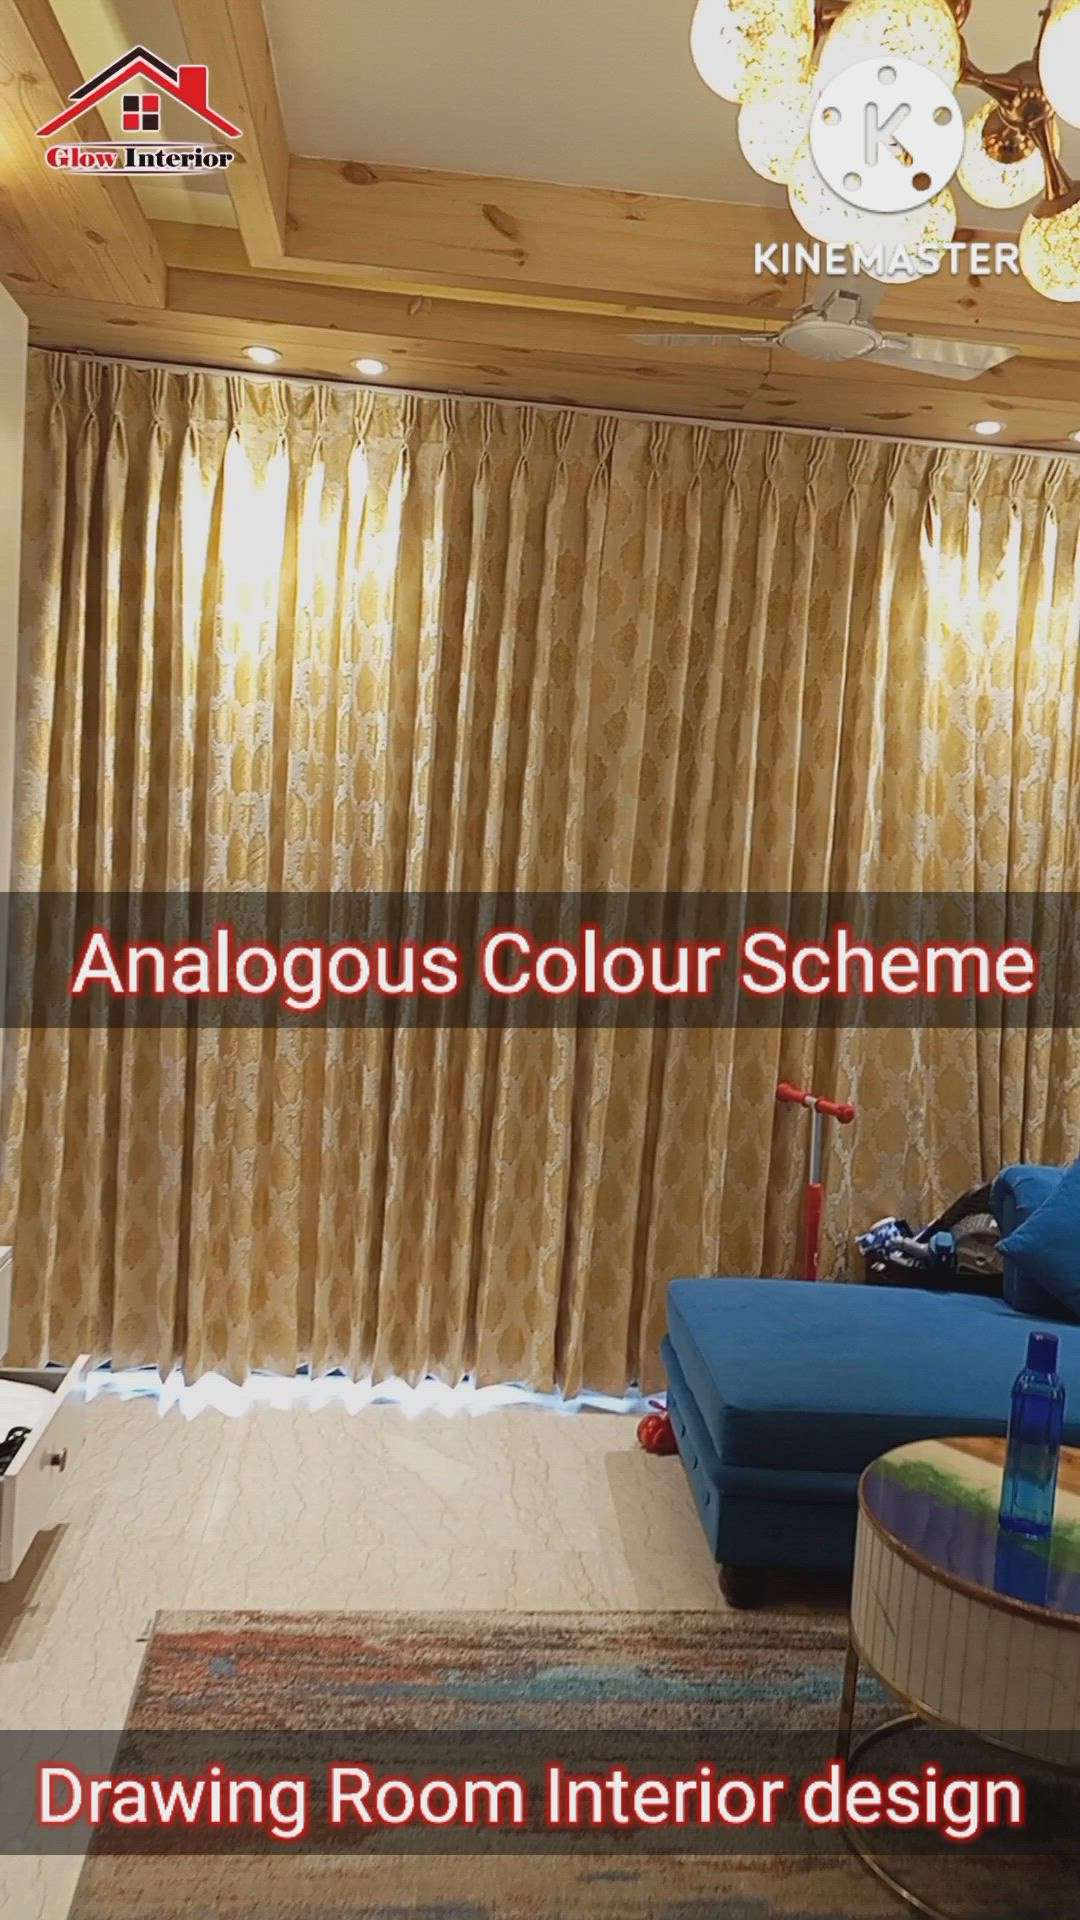 Drawing room interior design with Analogous Colour Scheme watch the video .
#drawingroom #Drawingroominterior #drawingroomsofa #drawingroomfalseceiling #drawingroomdesign #drawingroomcurtains  #WallDesigns #motorizedcurtaintack #drawingroompartition #wallmoulding